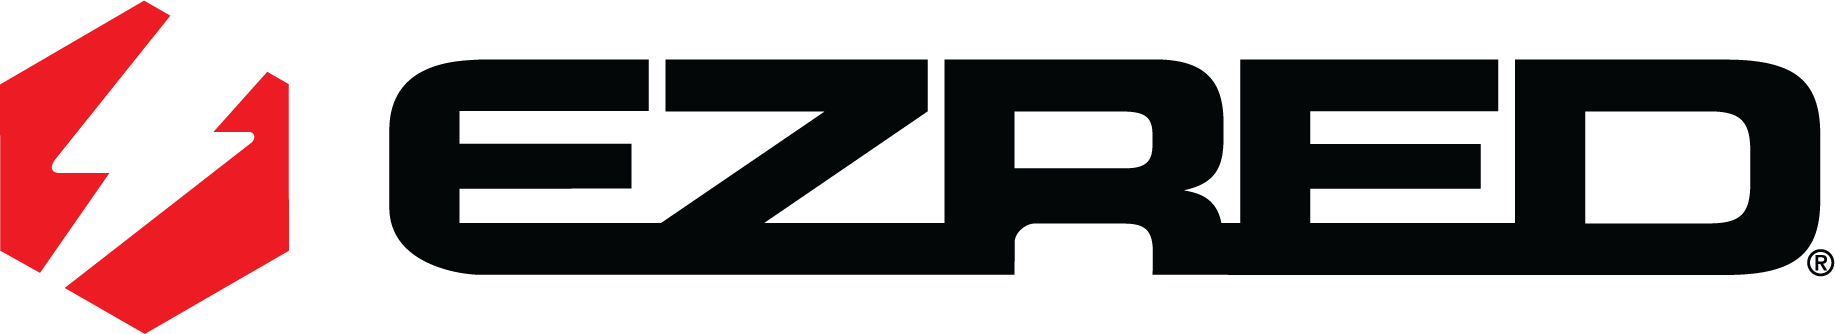 EZ Logo - Home | Getting the Job Done With EZRED Tools | EZRED